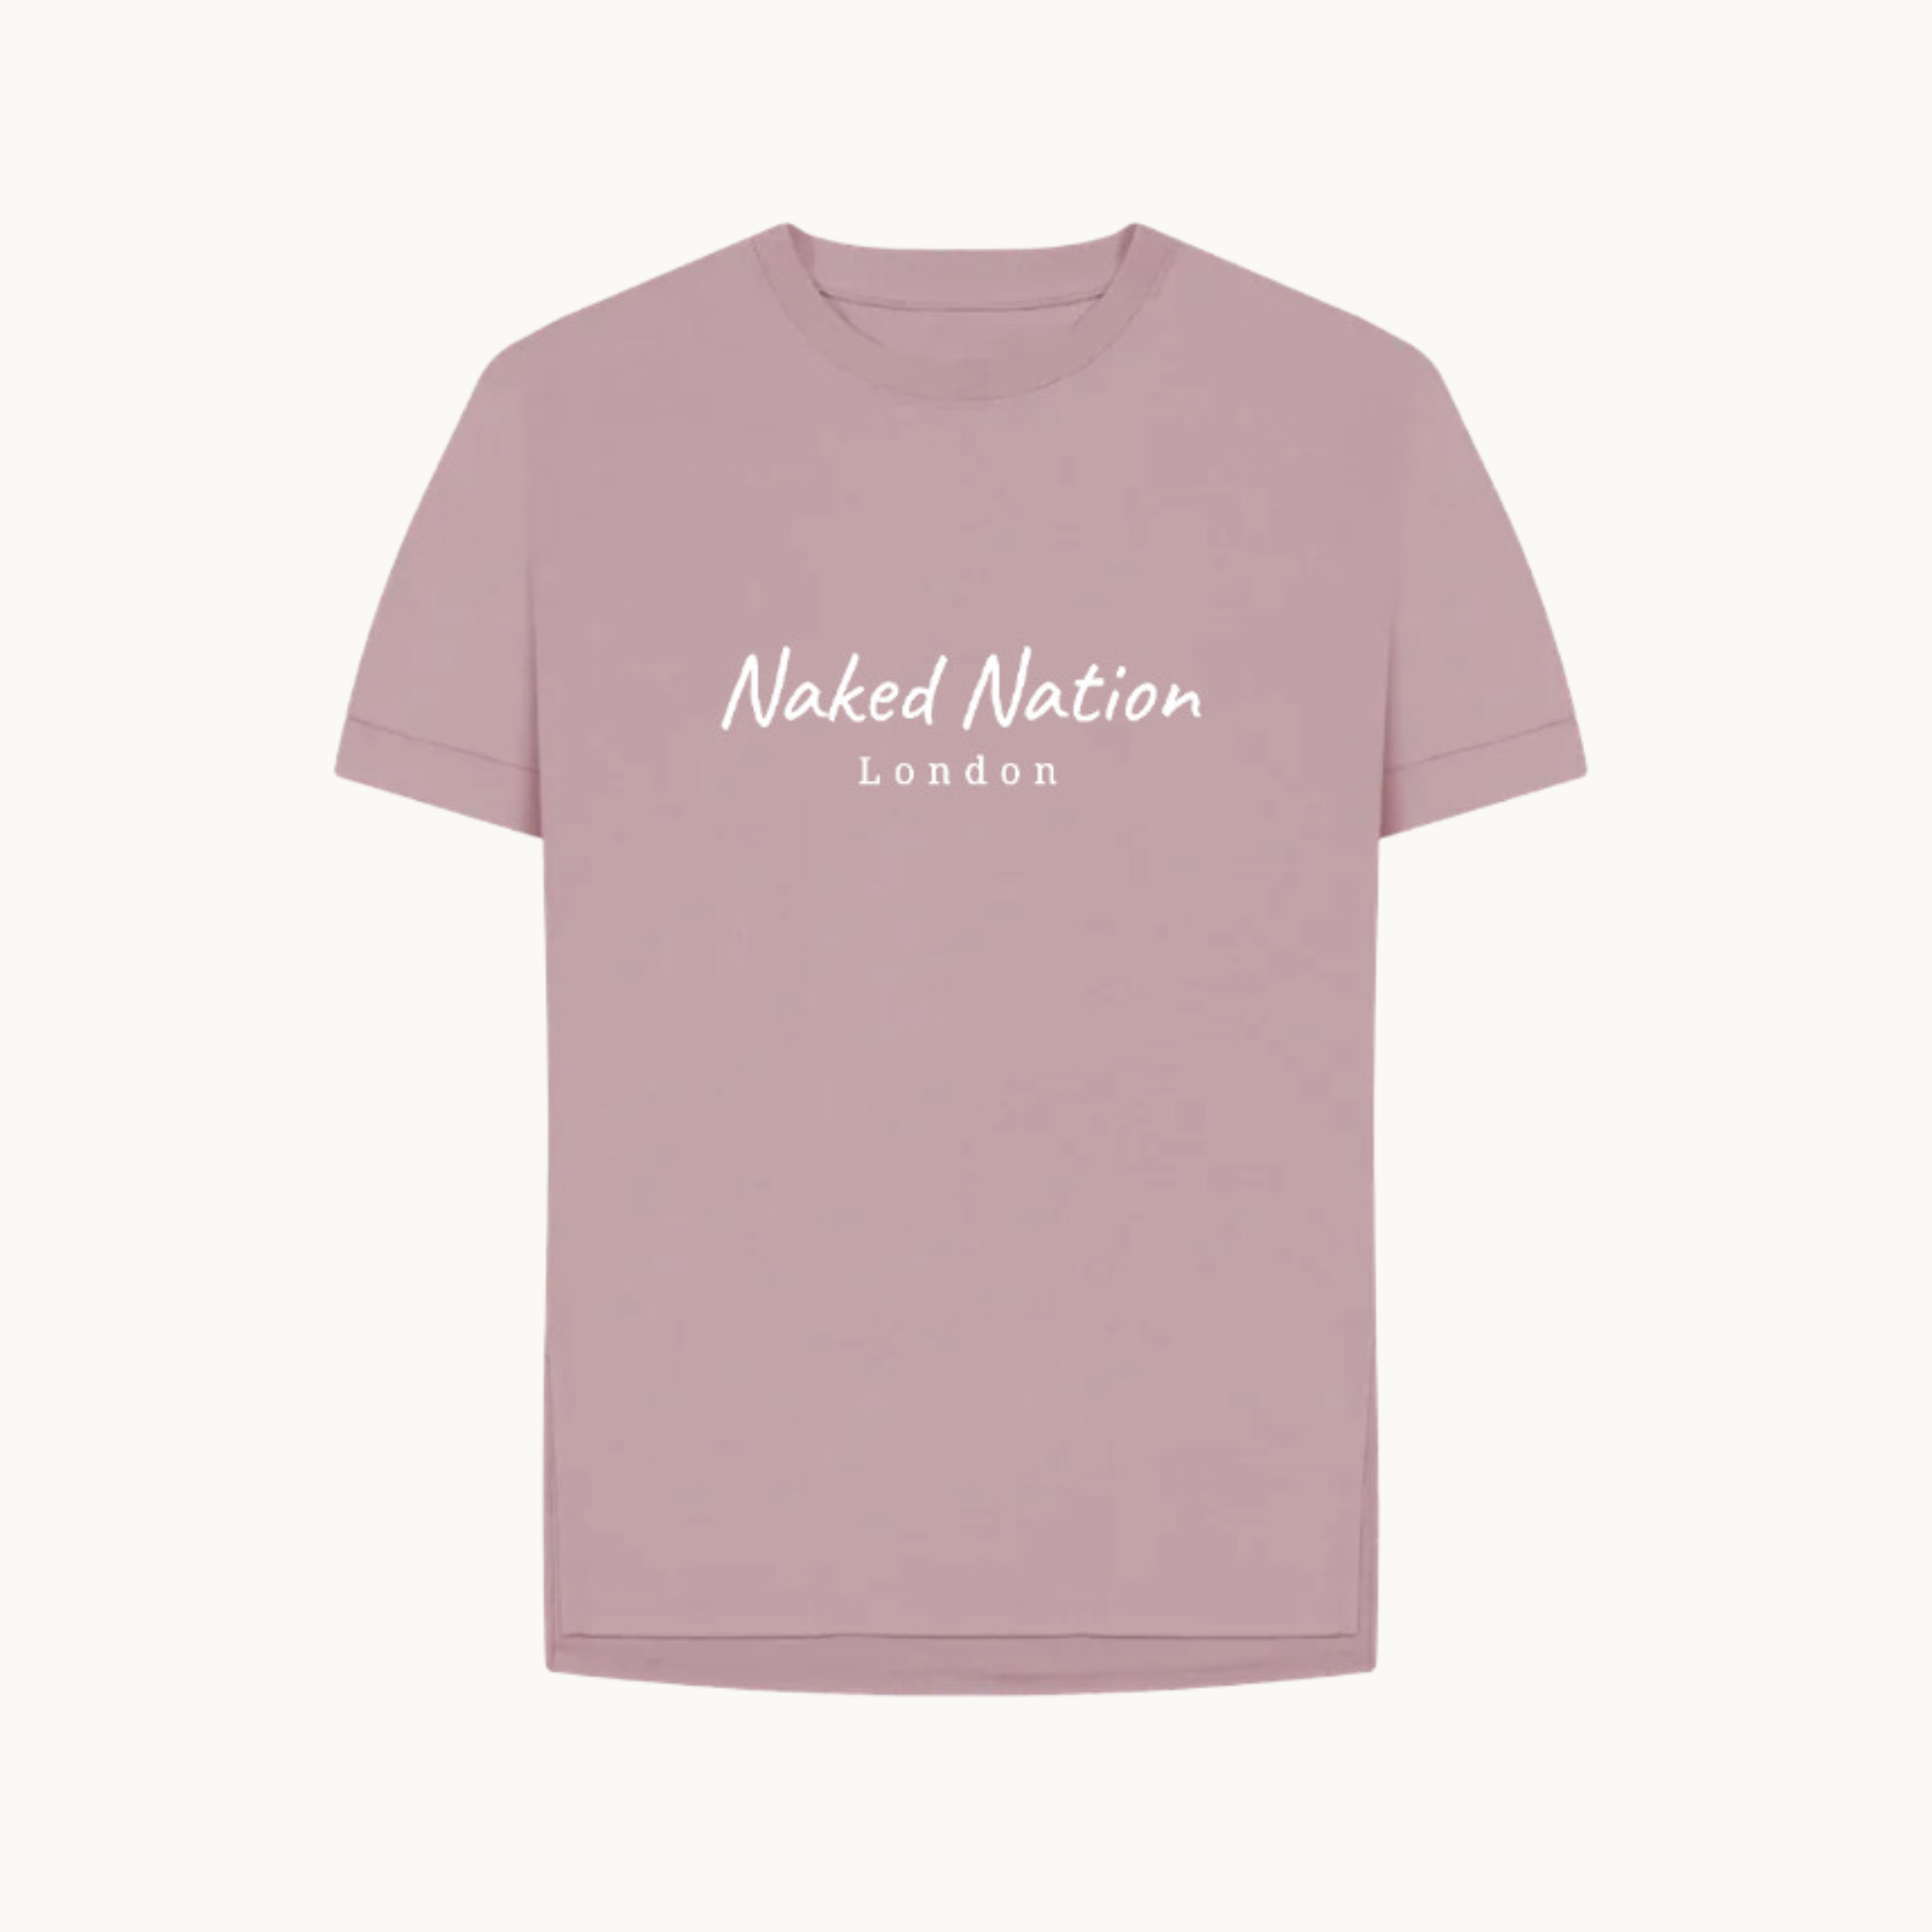 Women's Naked Nation T-shirt, crafted from Certified Organic Cotton - Relaxed Fit